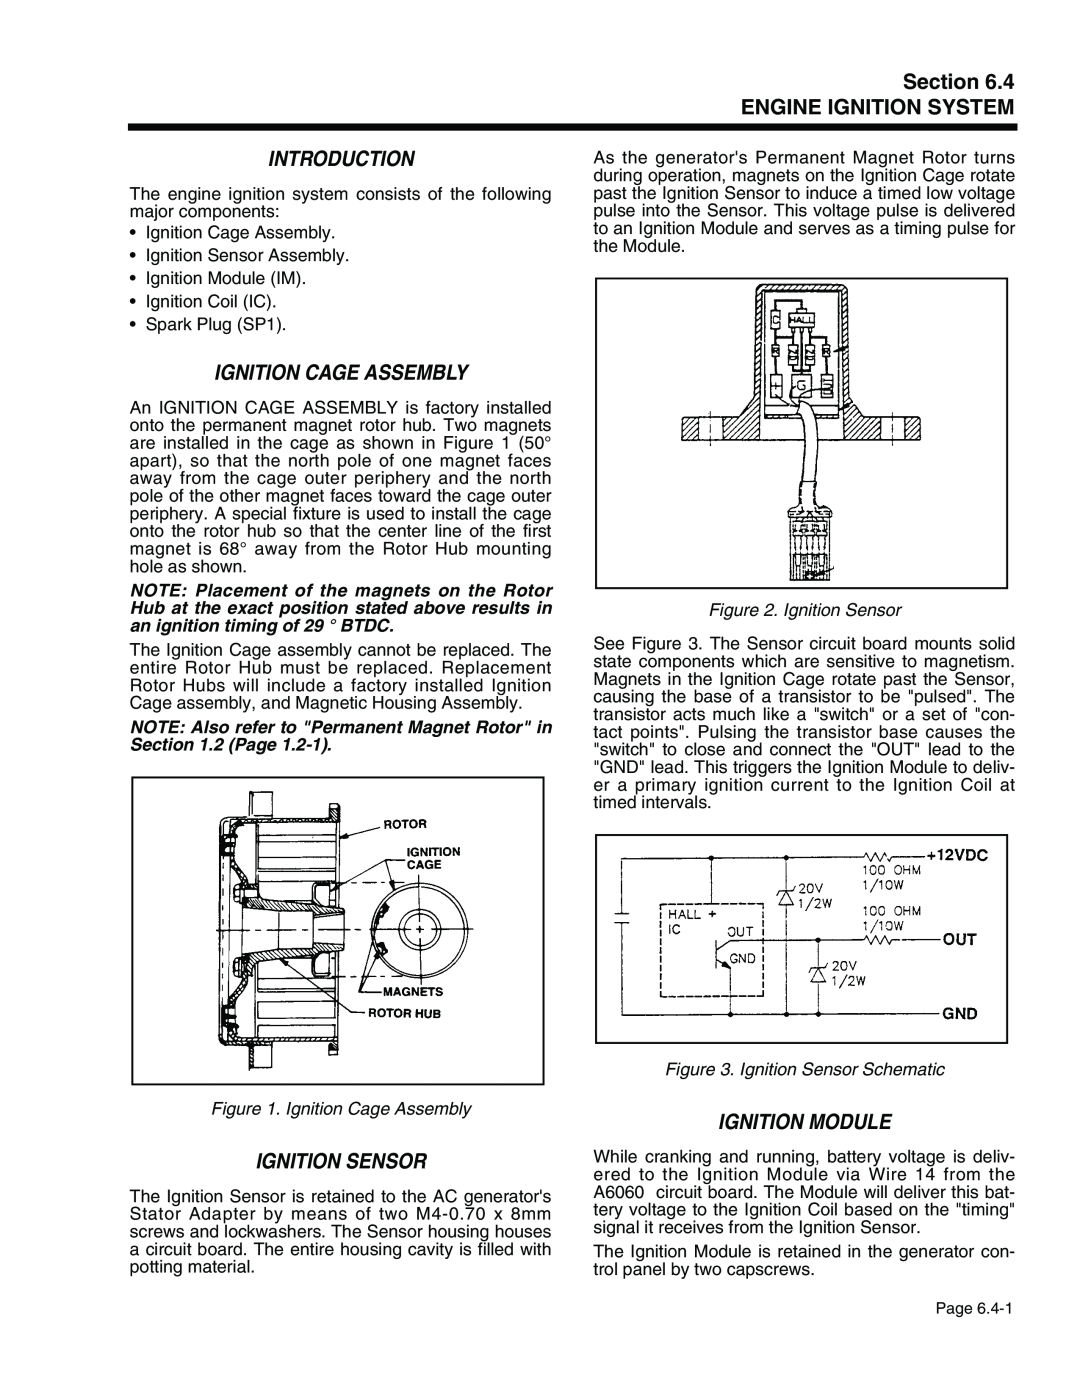 Generac Power Systems 941-2 Section ENGINE IGNITION SYSTEM, Ignition Cage Assembly, Ignition Sensor, Ignition Module 